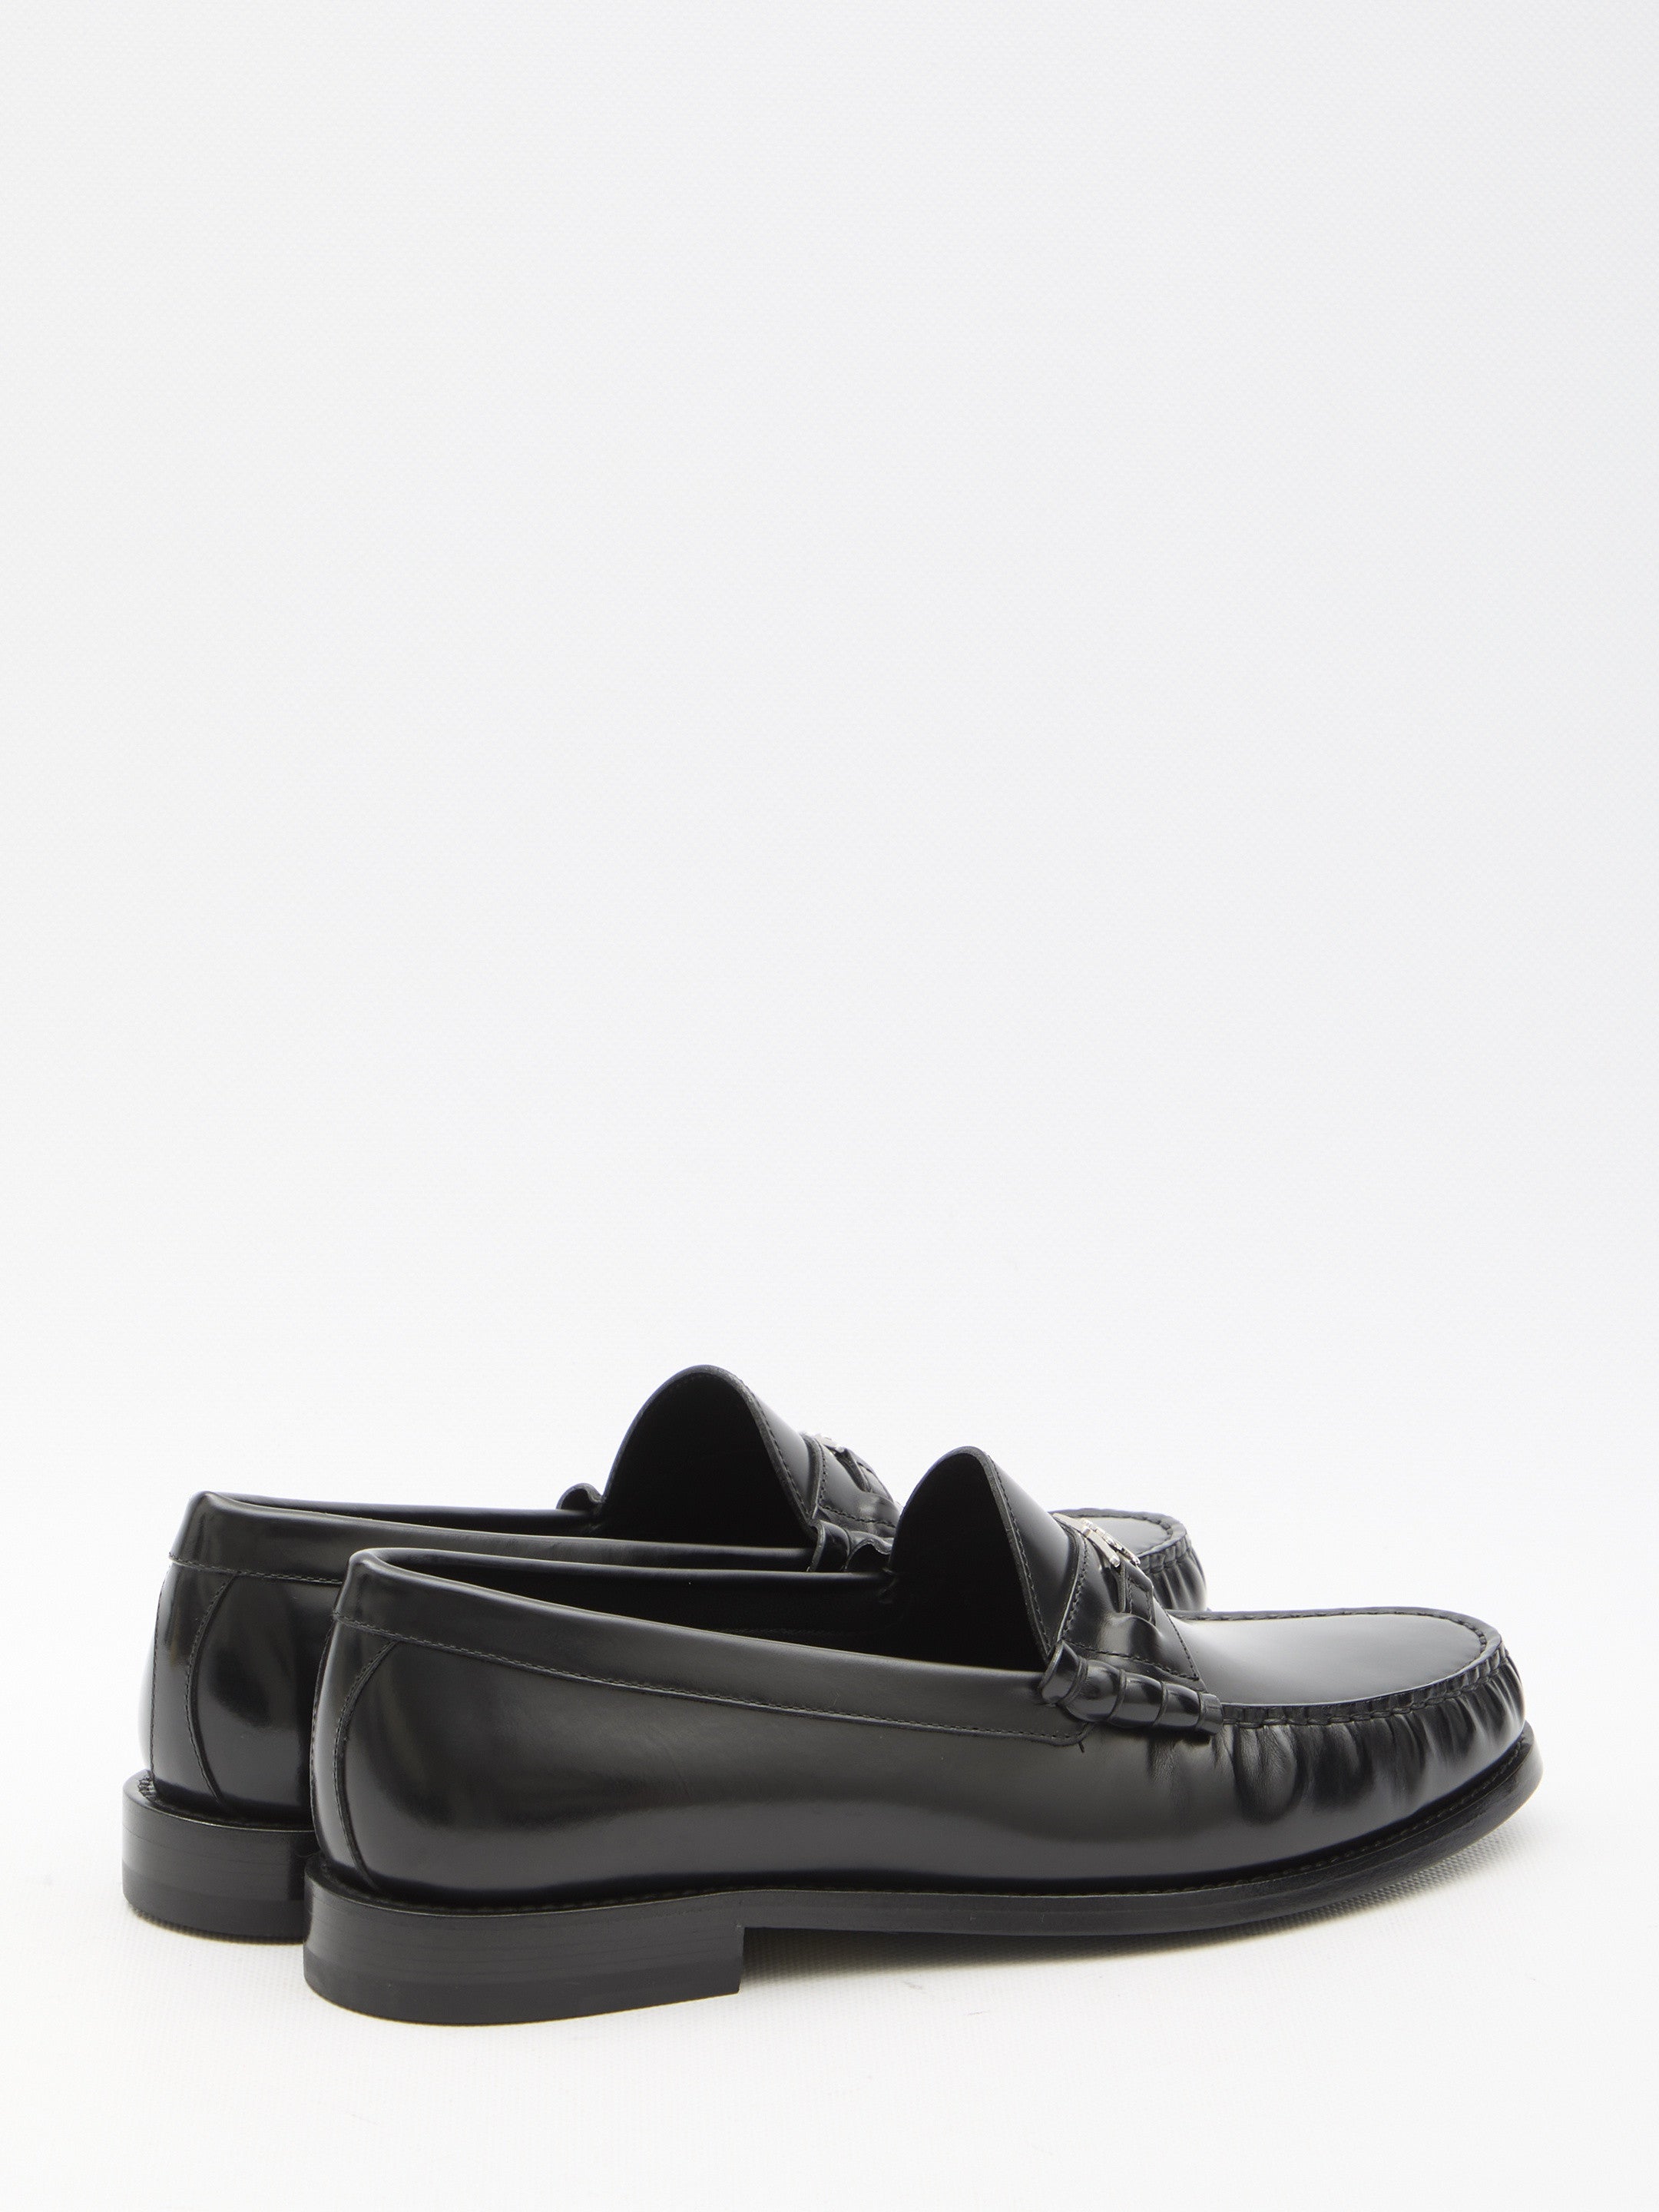 CELINE-OUTLET-SALE-Triomphe-Celine-Luco-loafers-Flache-Schuhe-ARCHIVE-COLLECTION-2.jpg